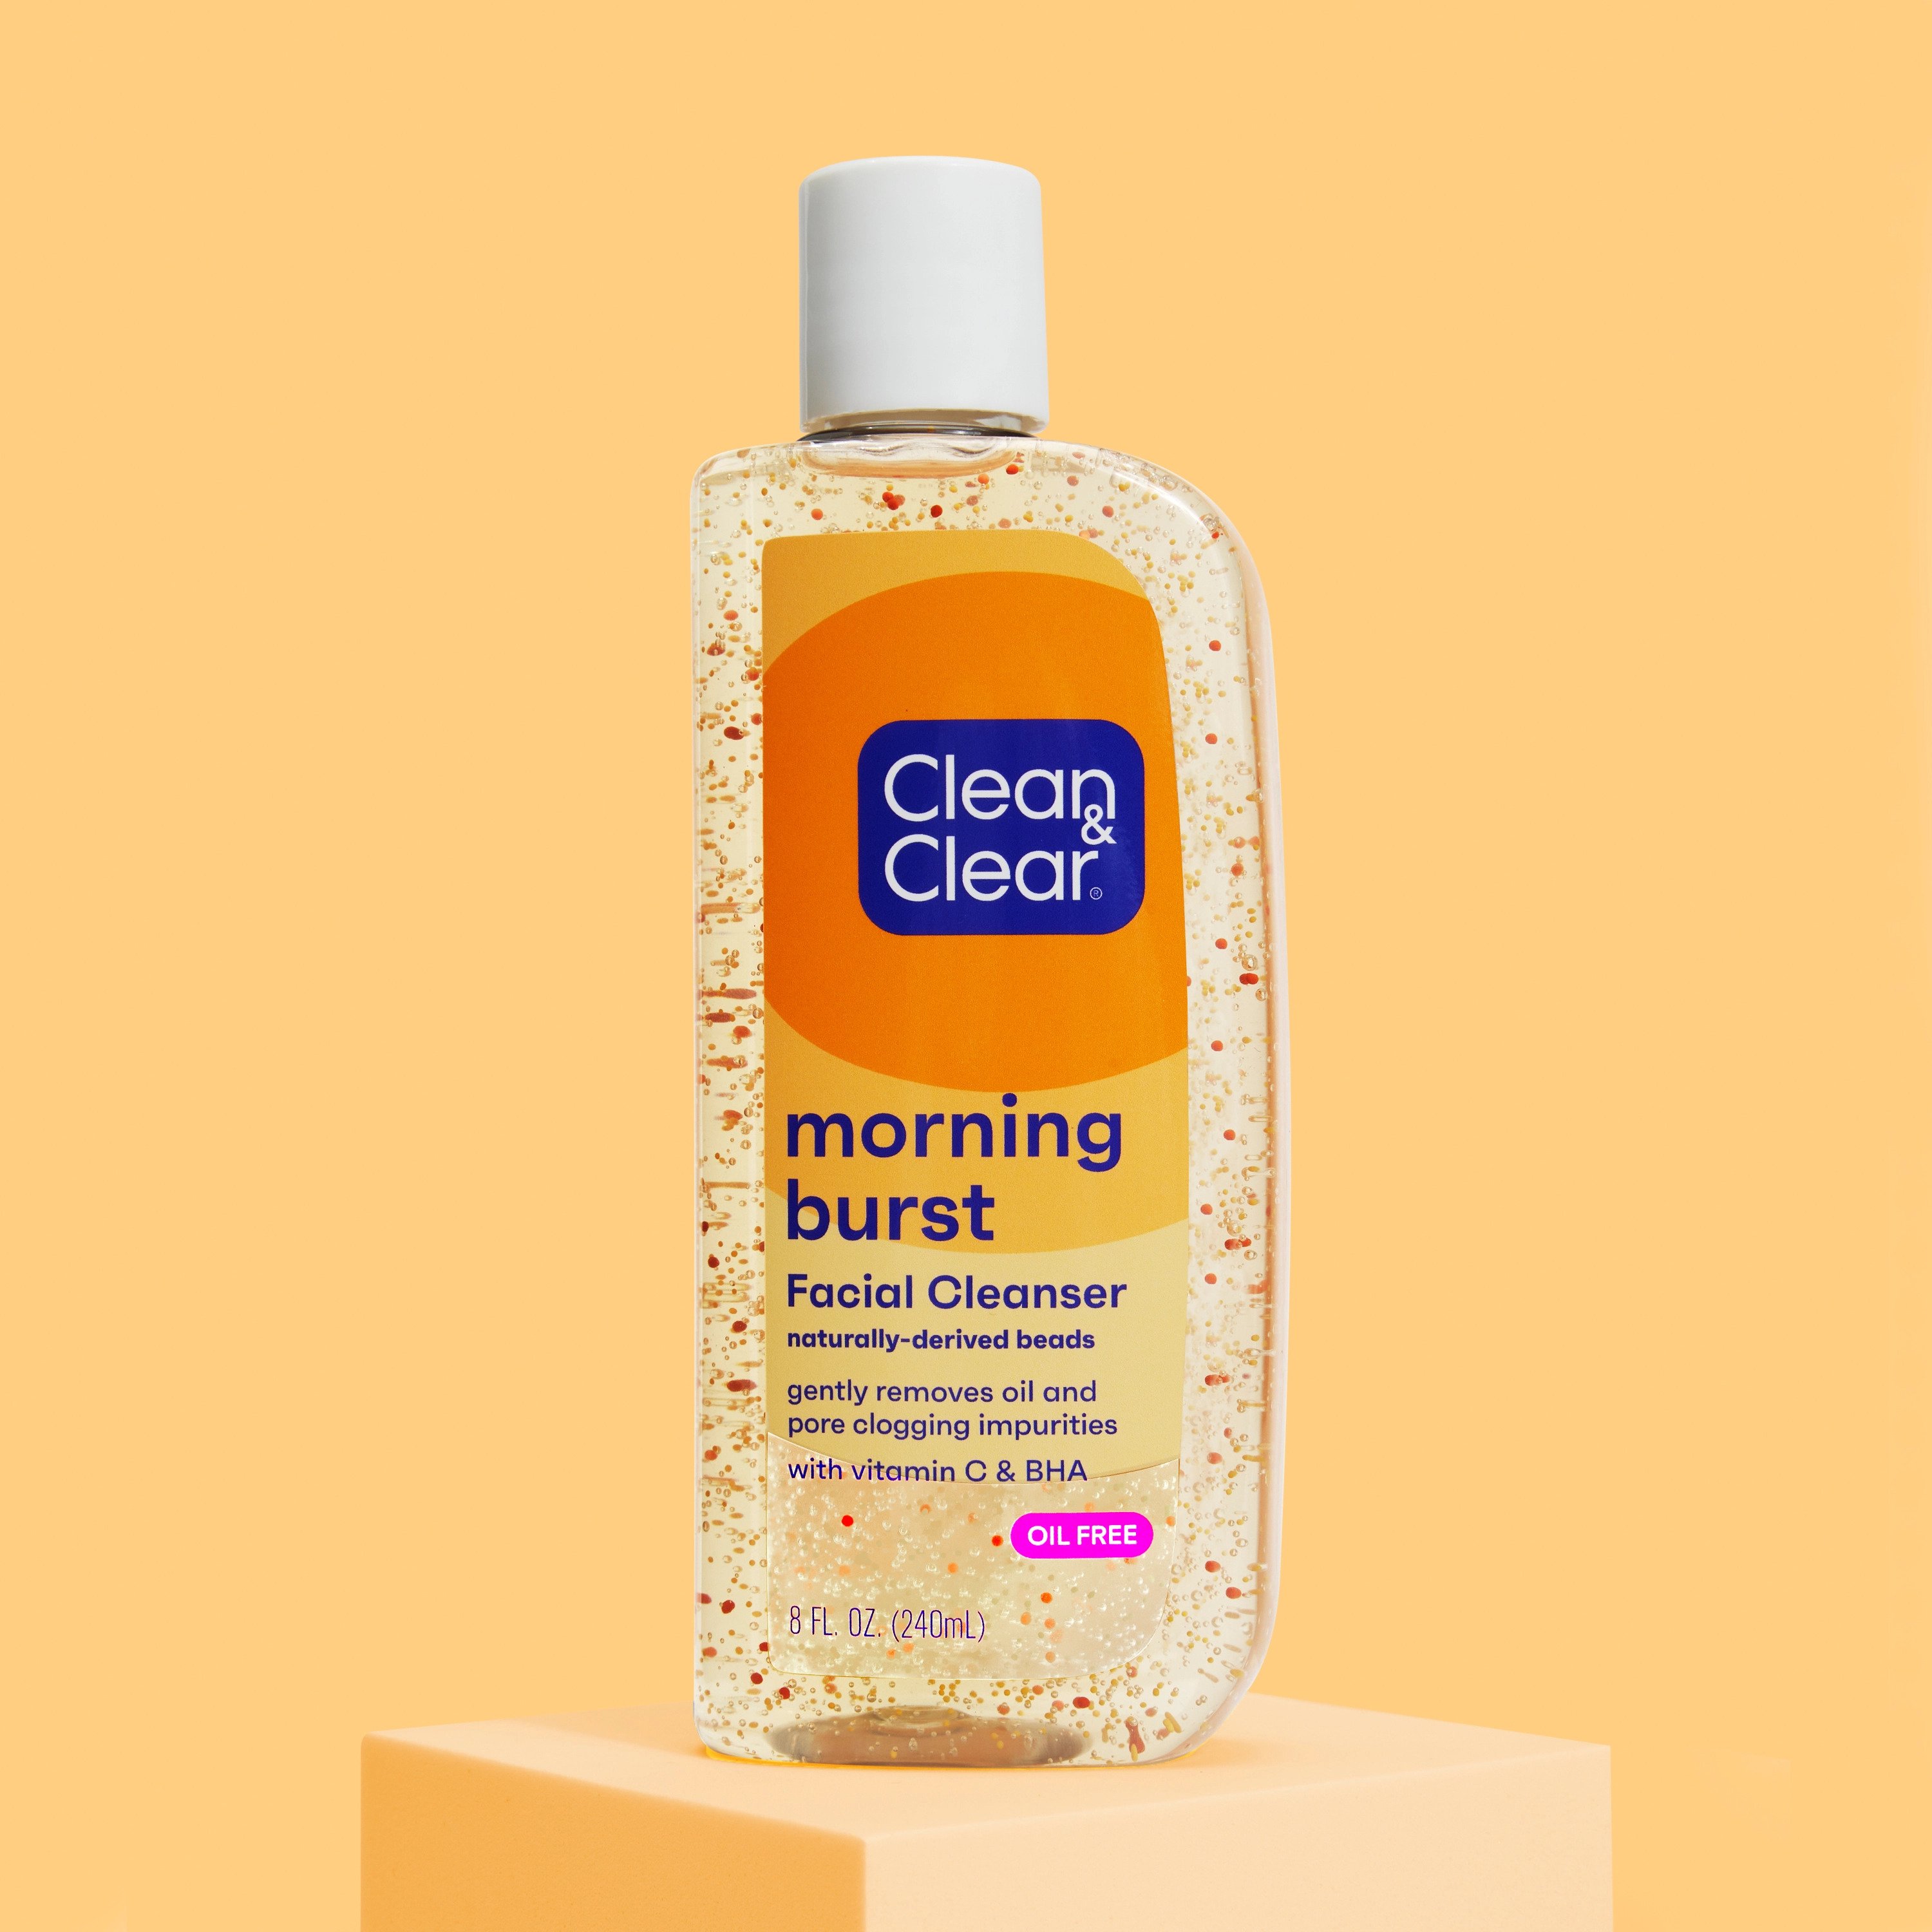 Clean & Clear Morning Burst Oil-Free Gentle Daily Face Wash, 8 fl. oz